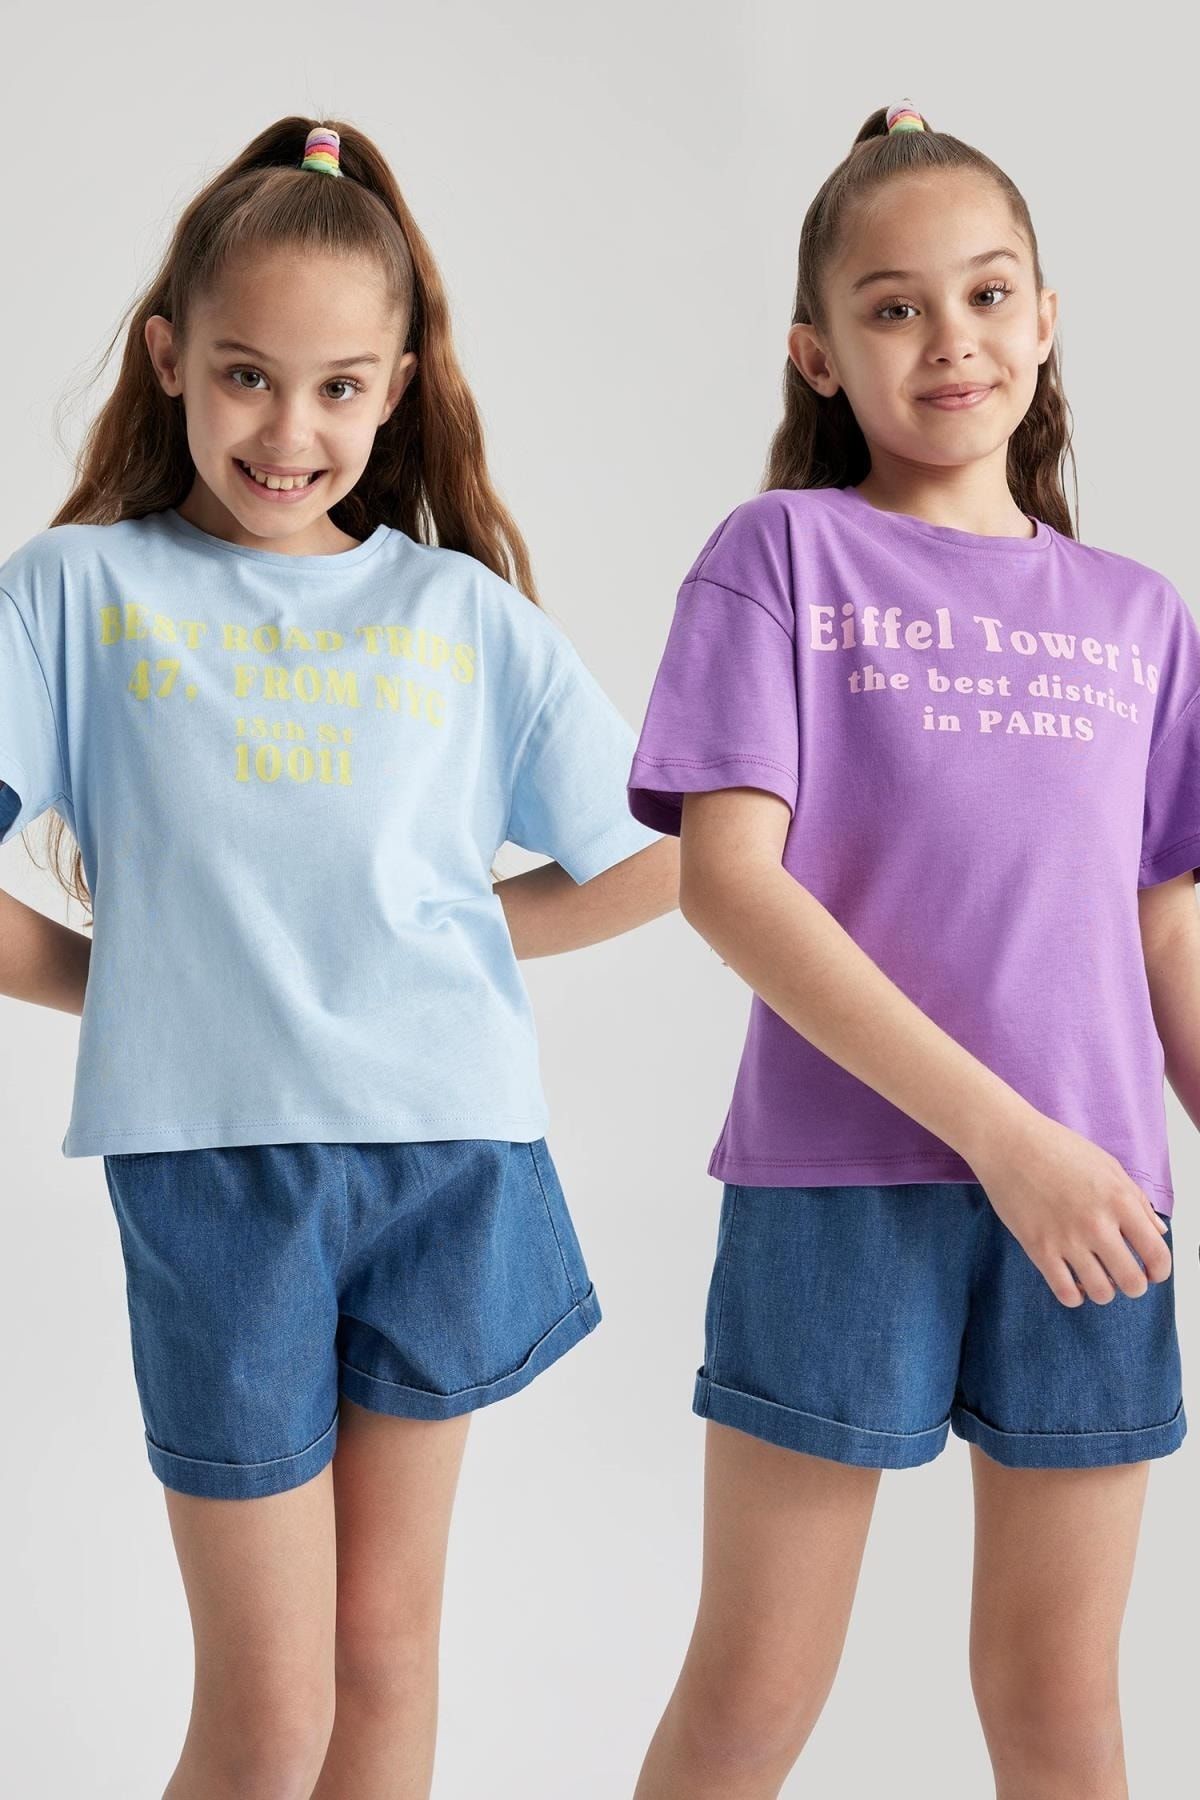 Relax T-shirts for Girls